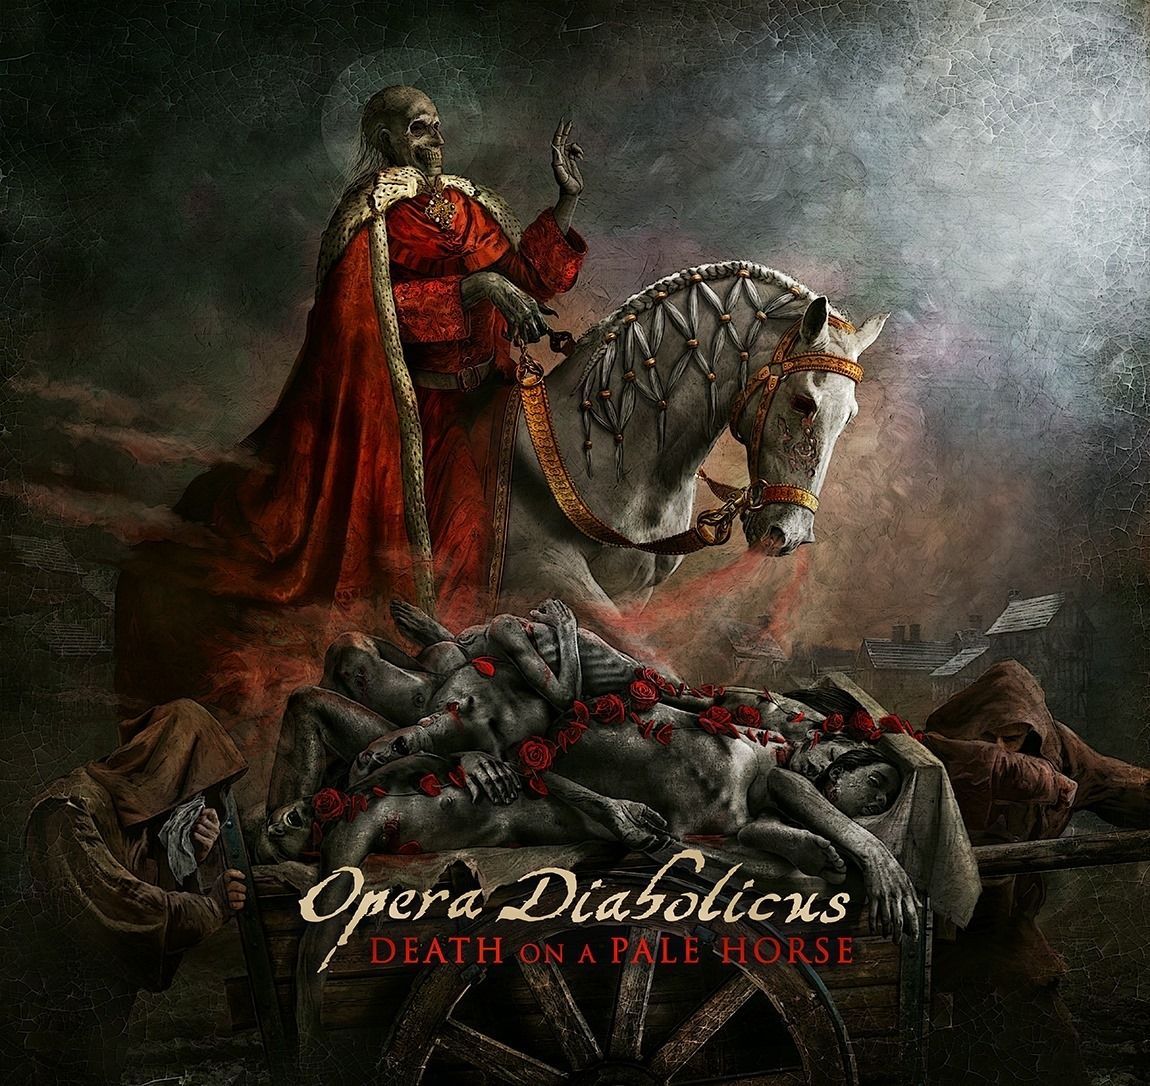 Opera Diabolicus - Bring Out Your Dead (clip)